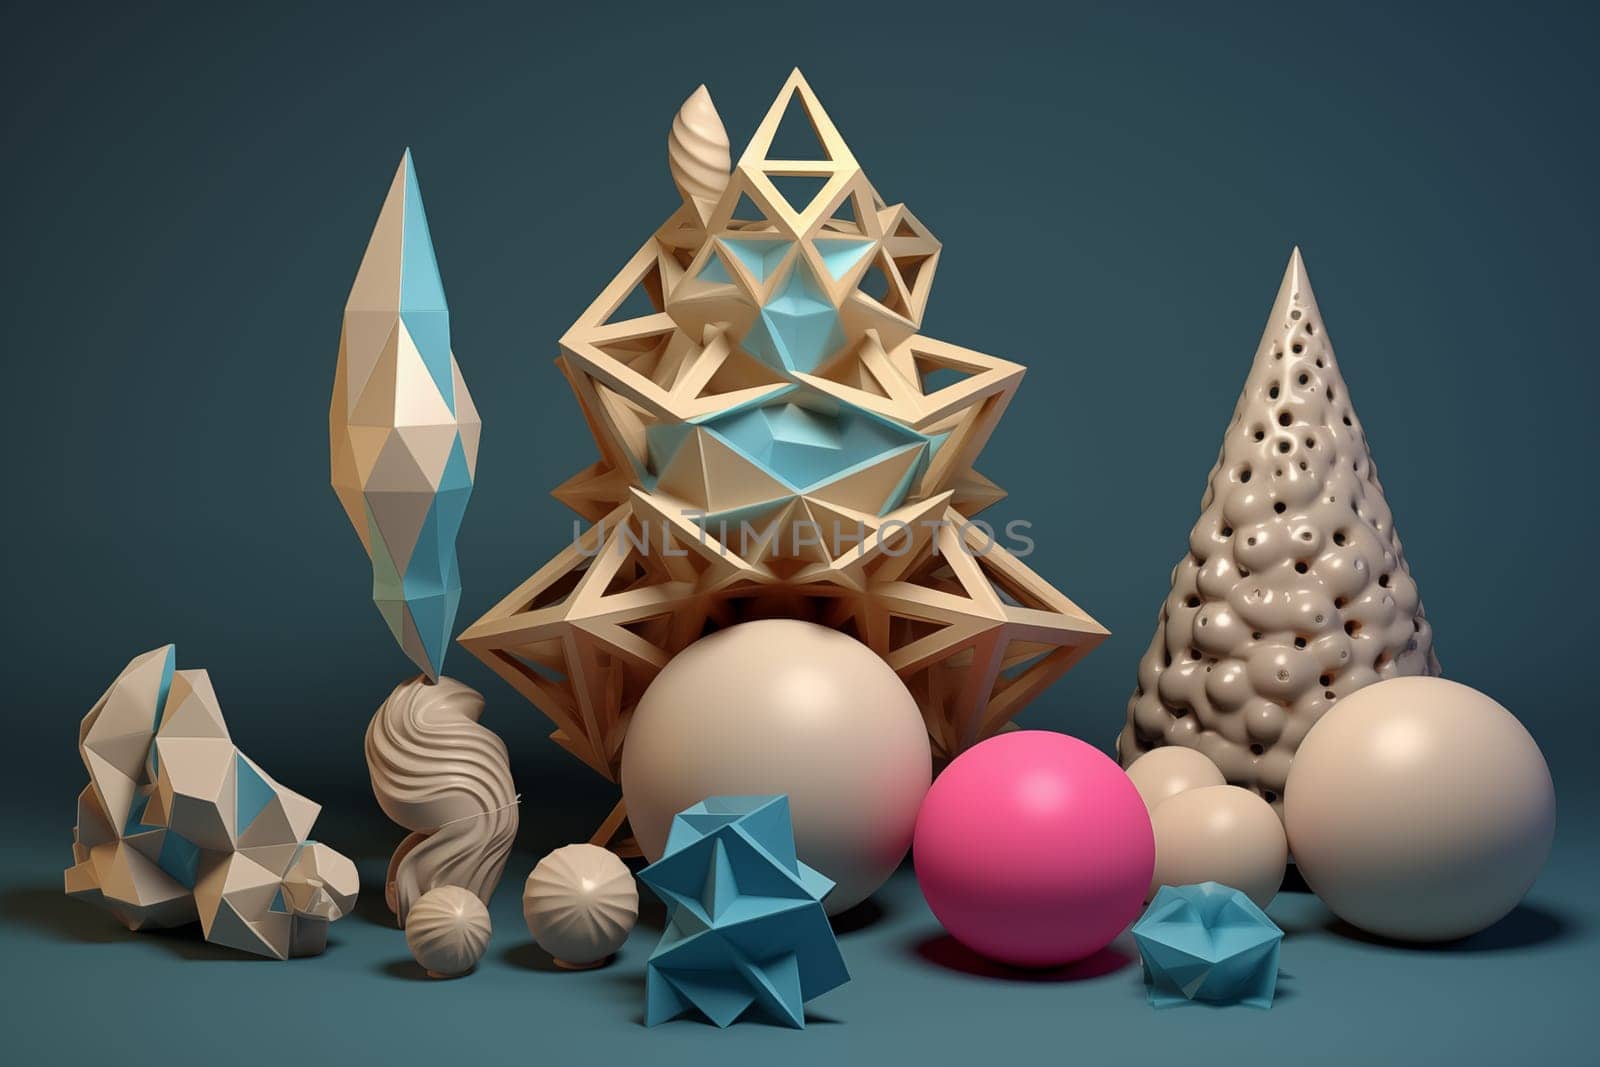 A collection of various 3D geometric shapes, featuring different textures and sizes